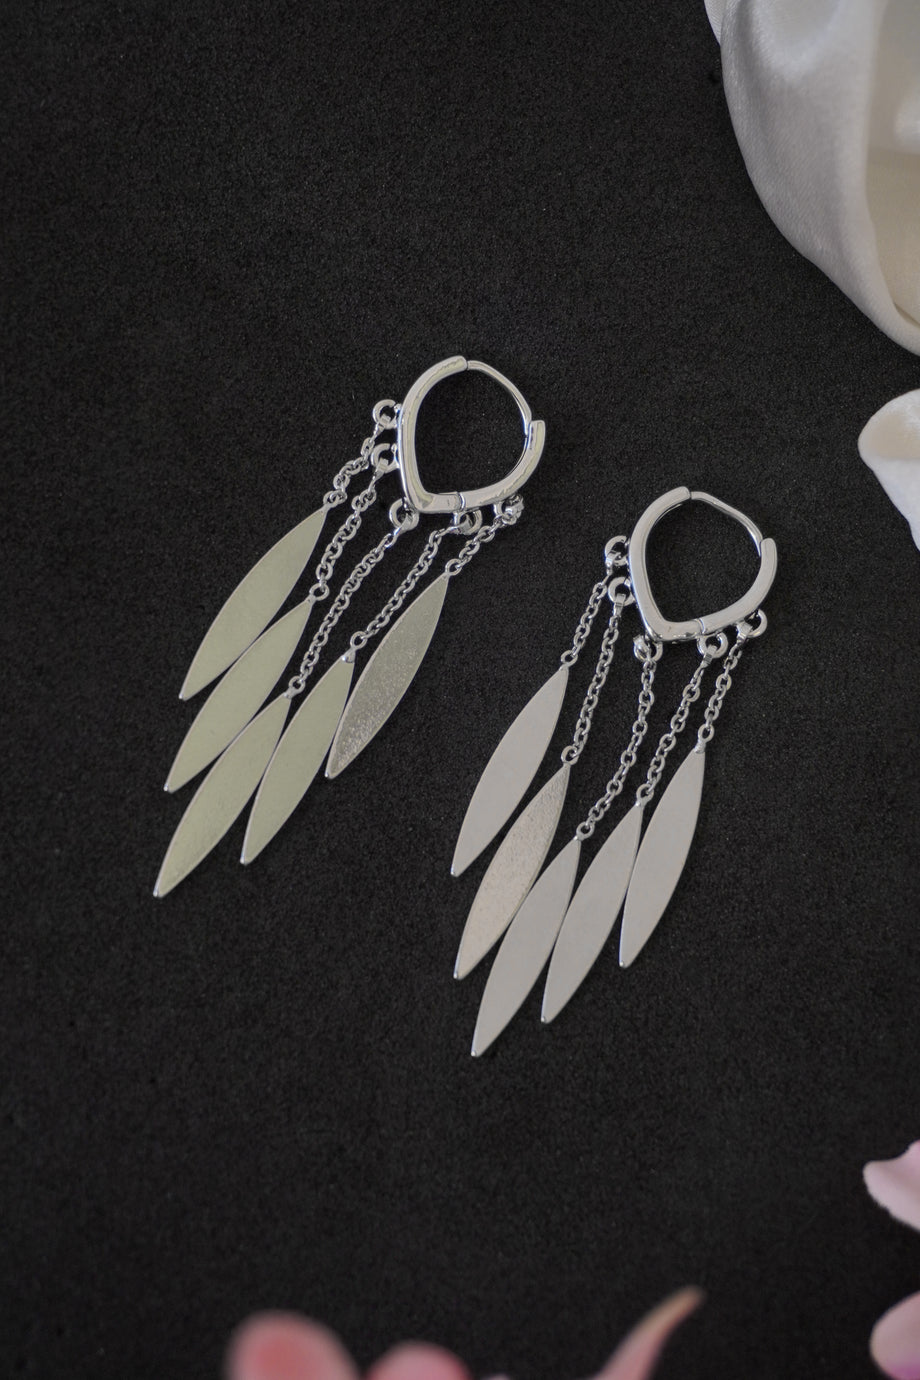 Buy peacock feather earrings at Amazon.in